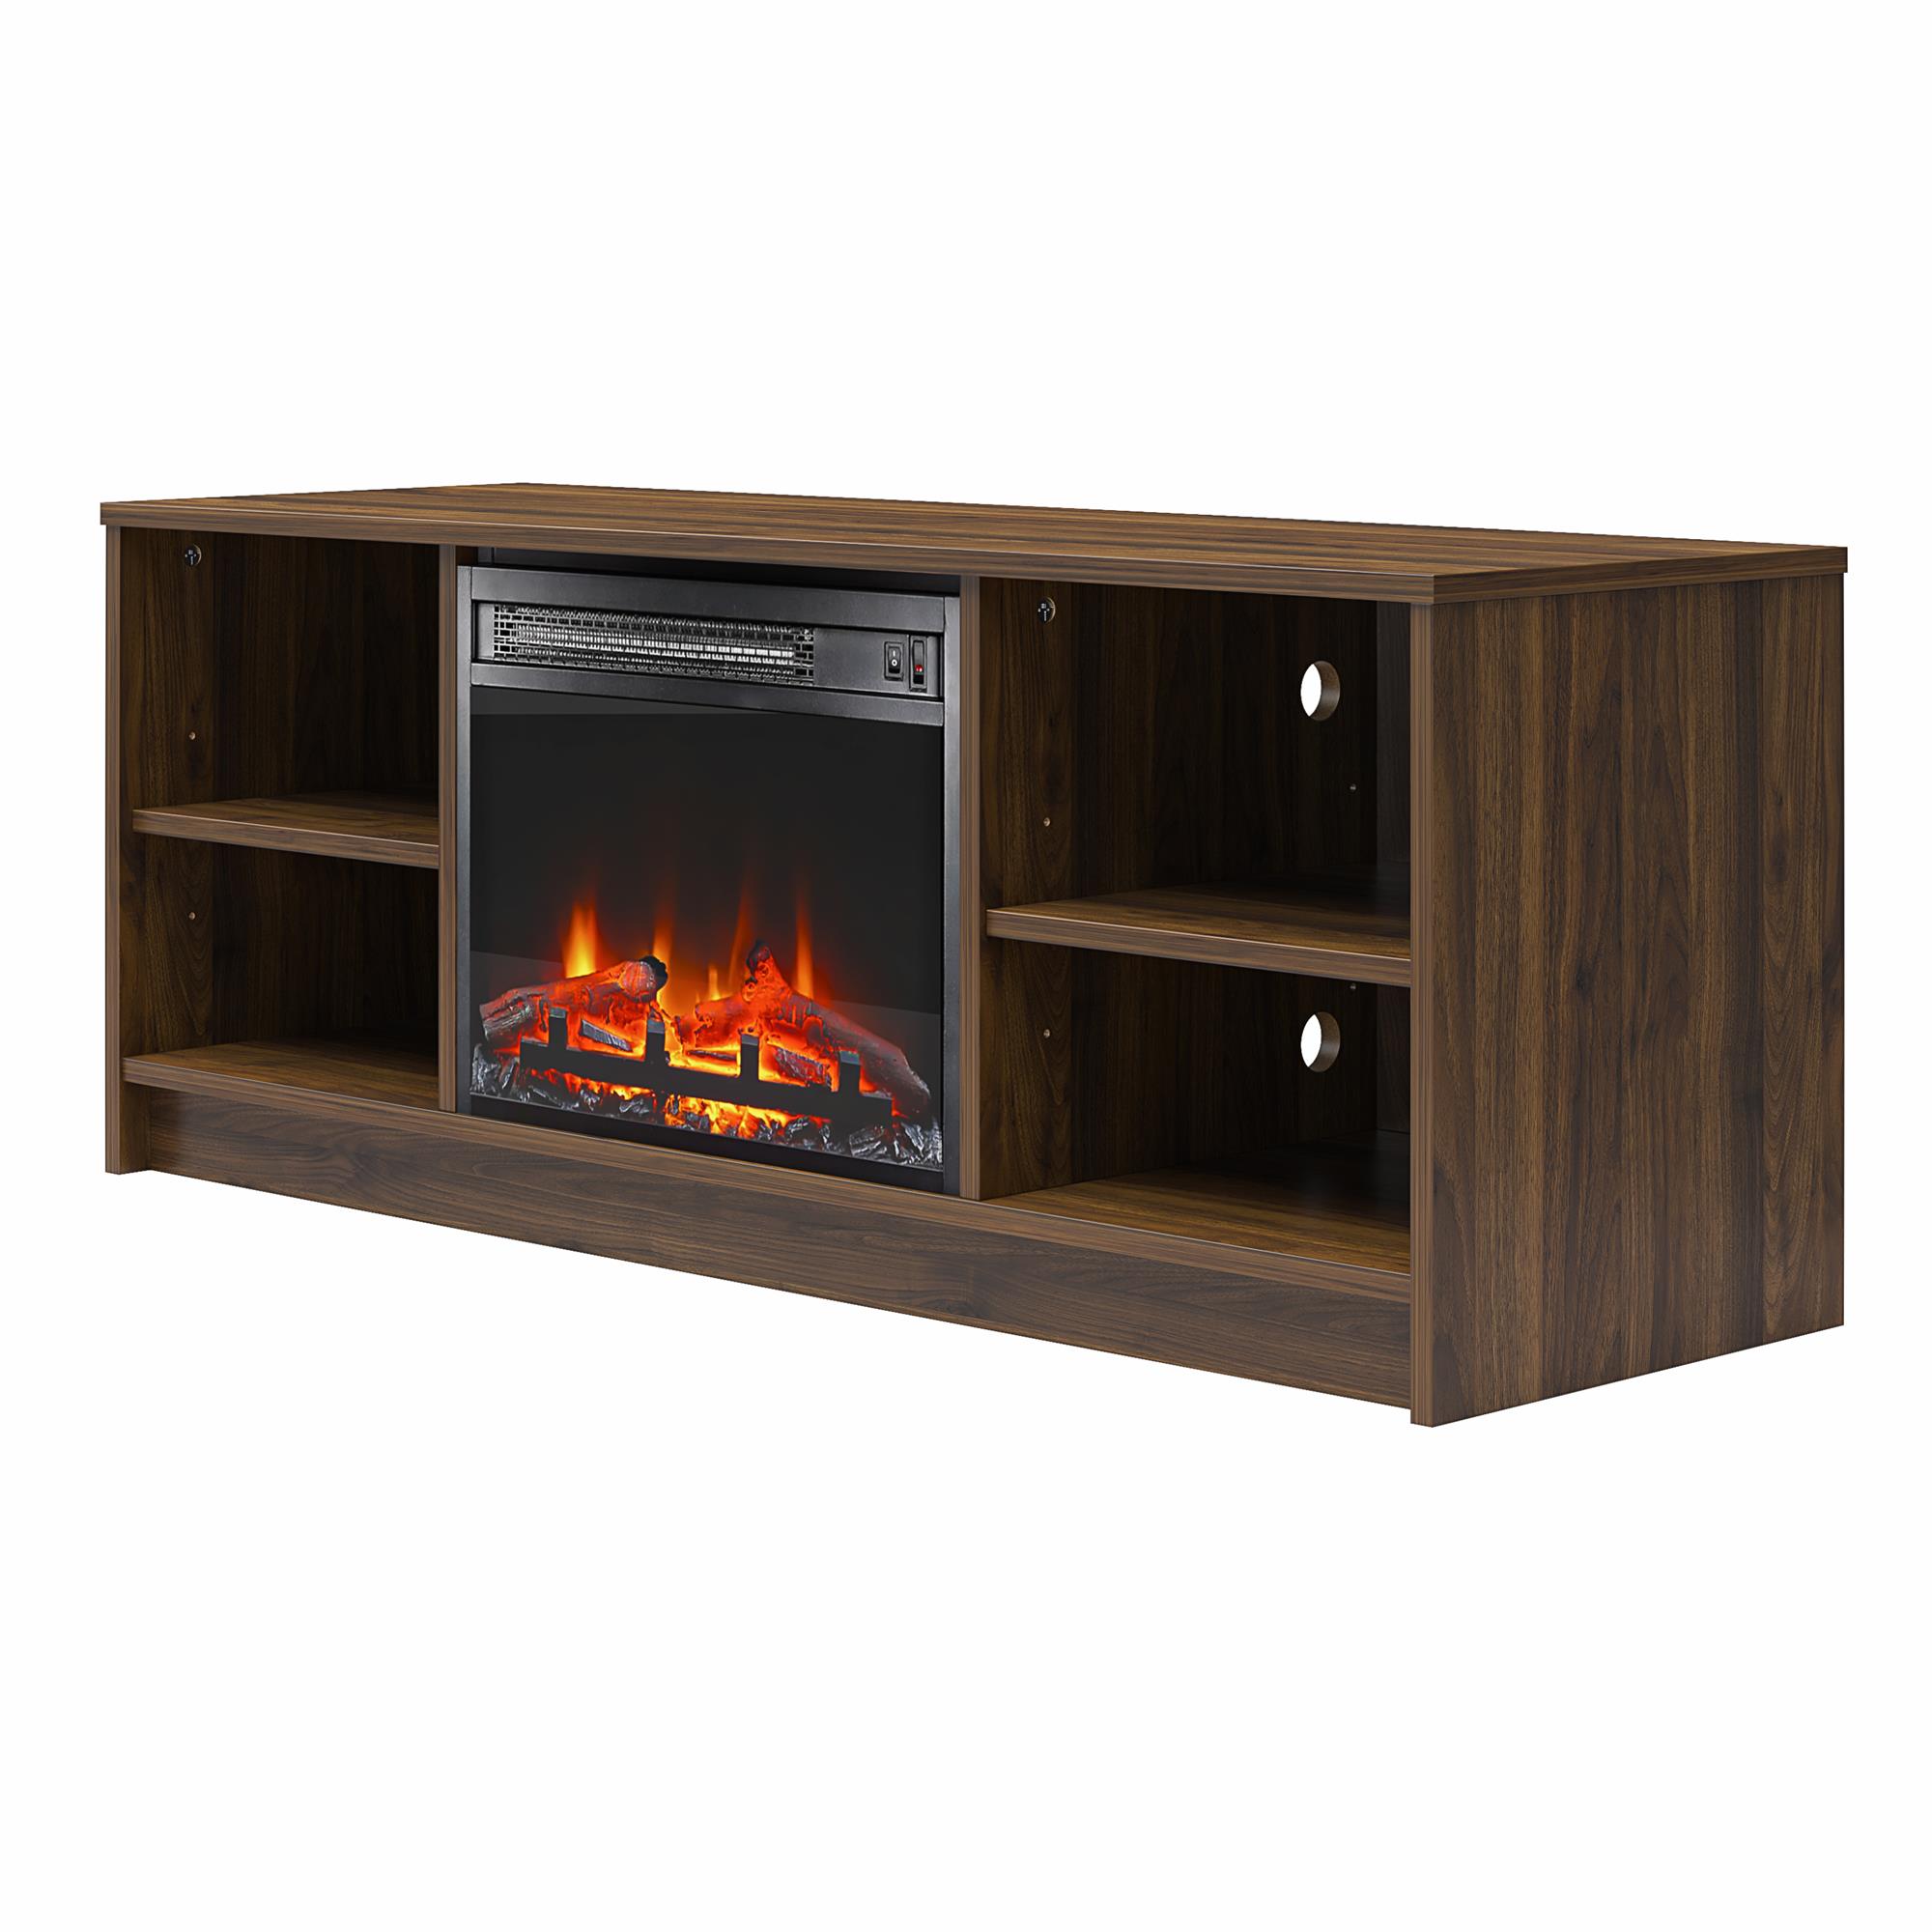 Mainstays Fireplace TV Stand, for TVs up to 55", Walnut - image 5 of 12